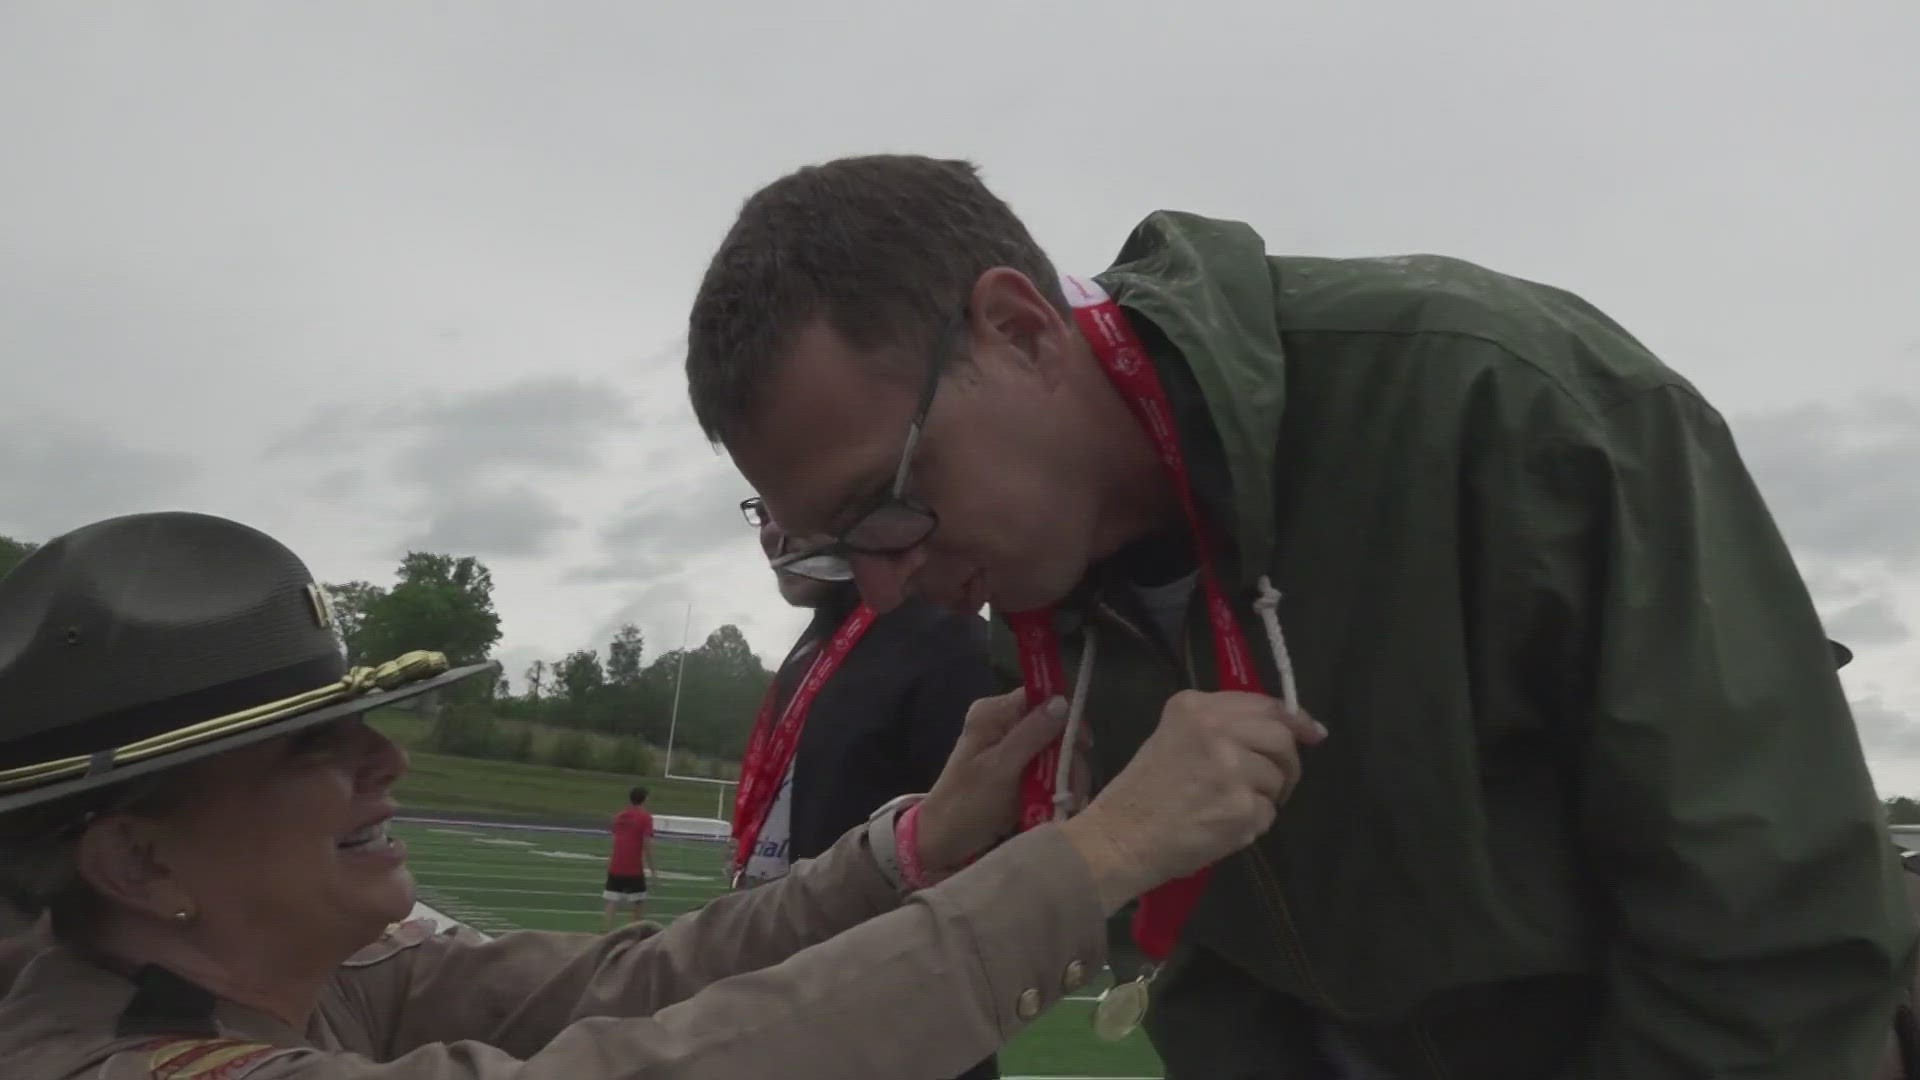 The event was at Campbell County High School and the first time a Special Olympics event has happened there in 20 years.